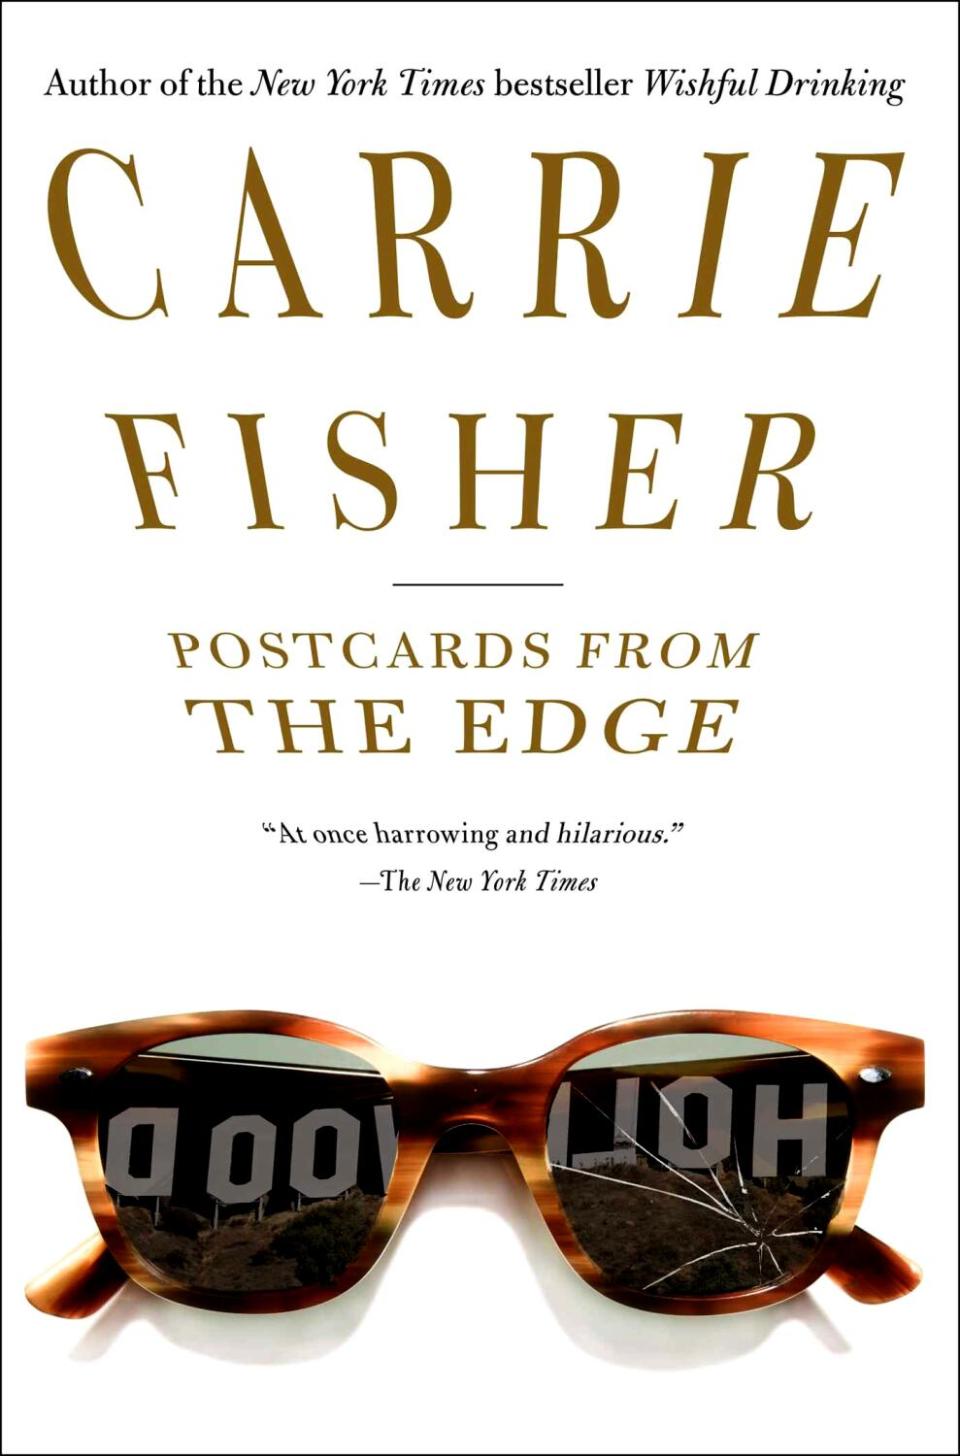 "Postcards From the Edge" by Carrie Fisher